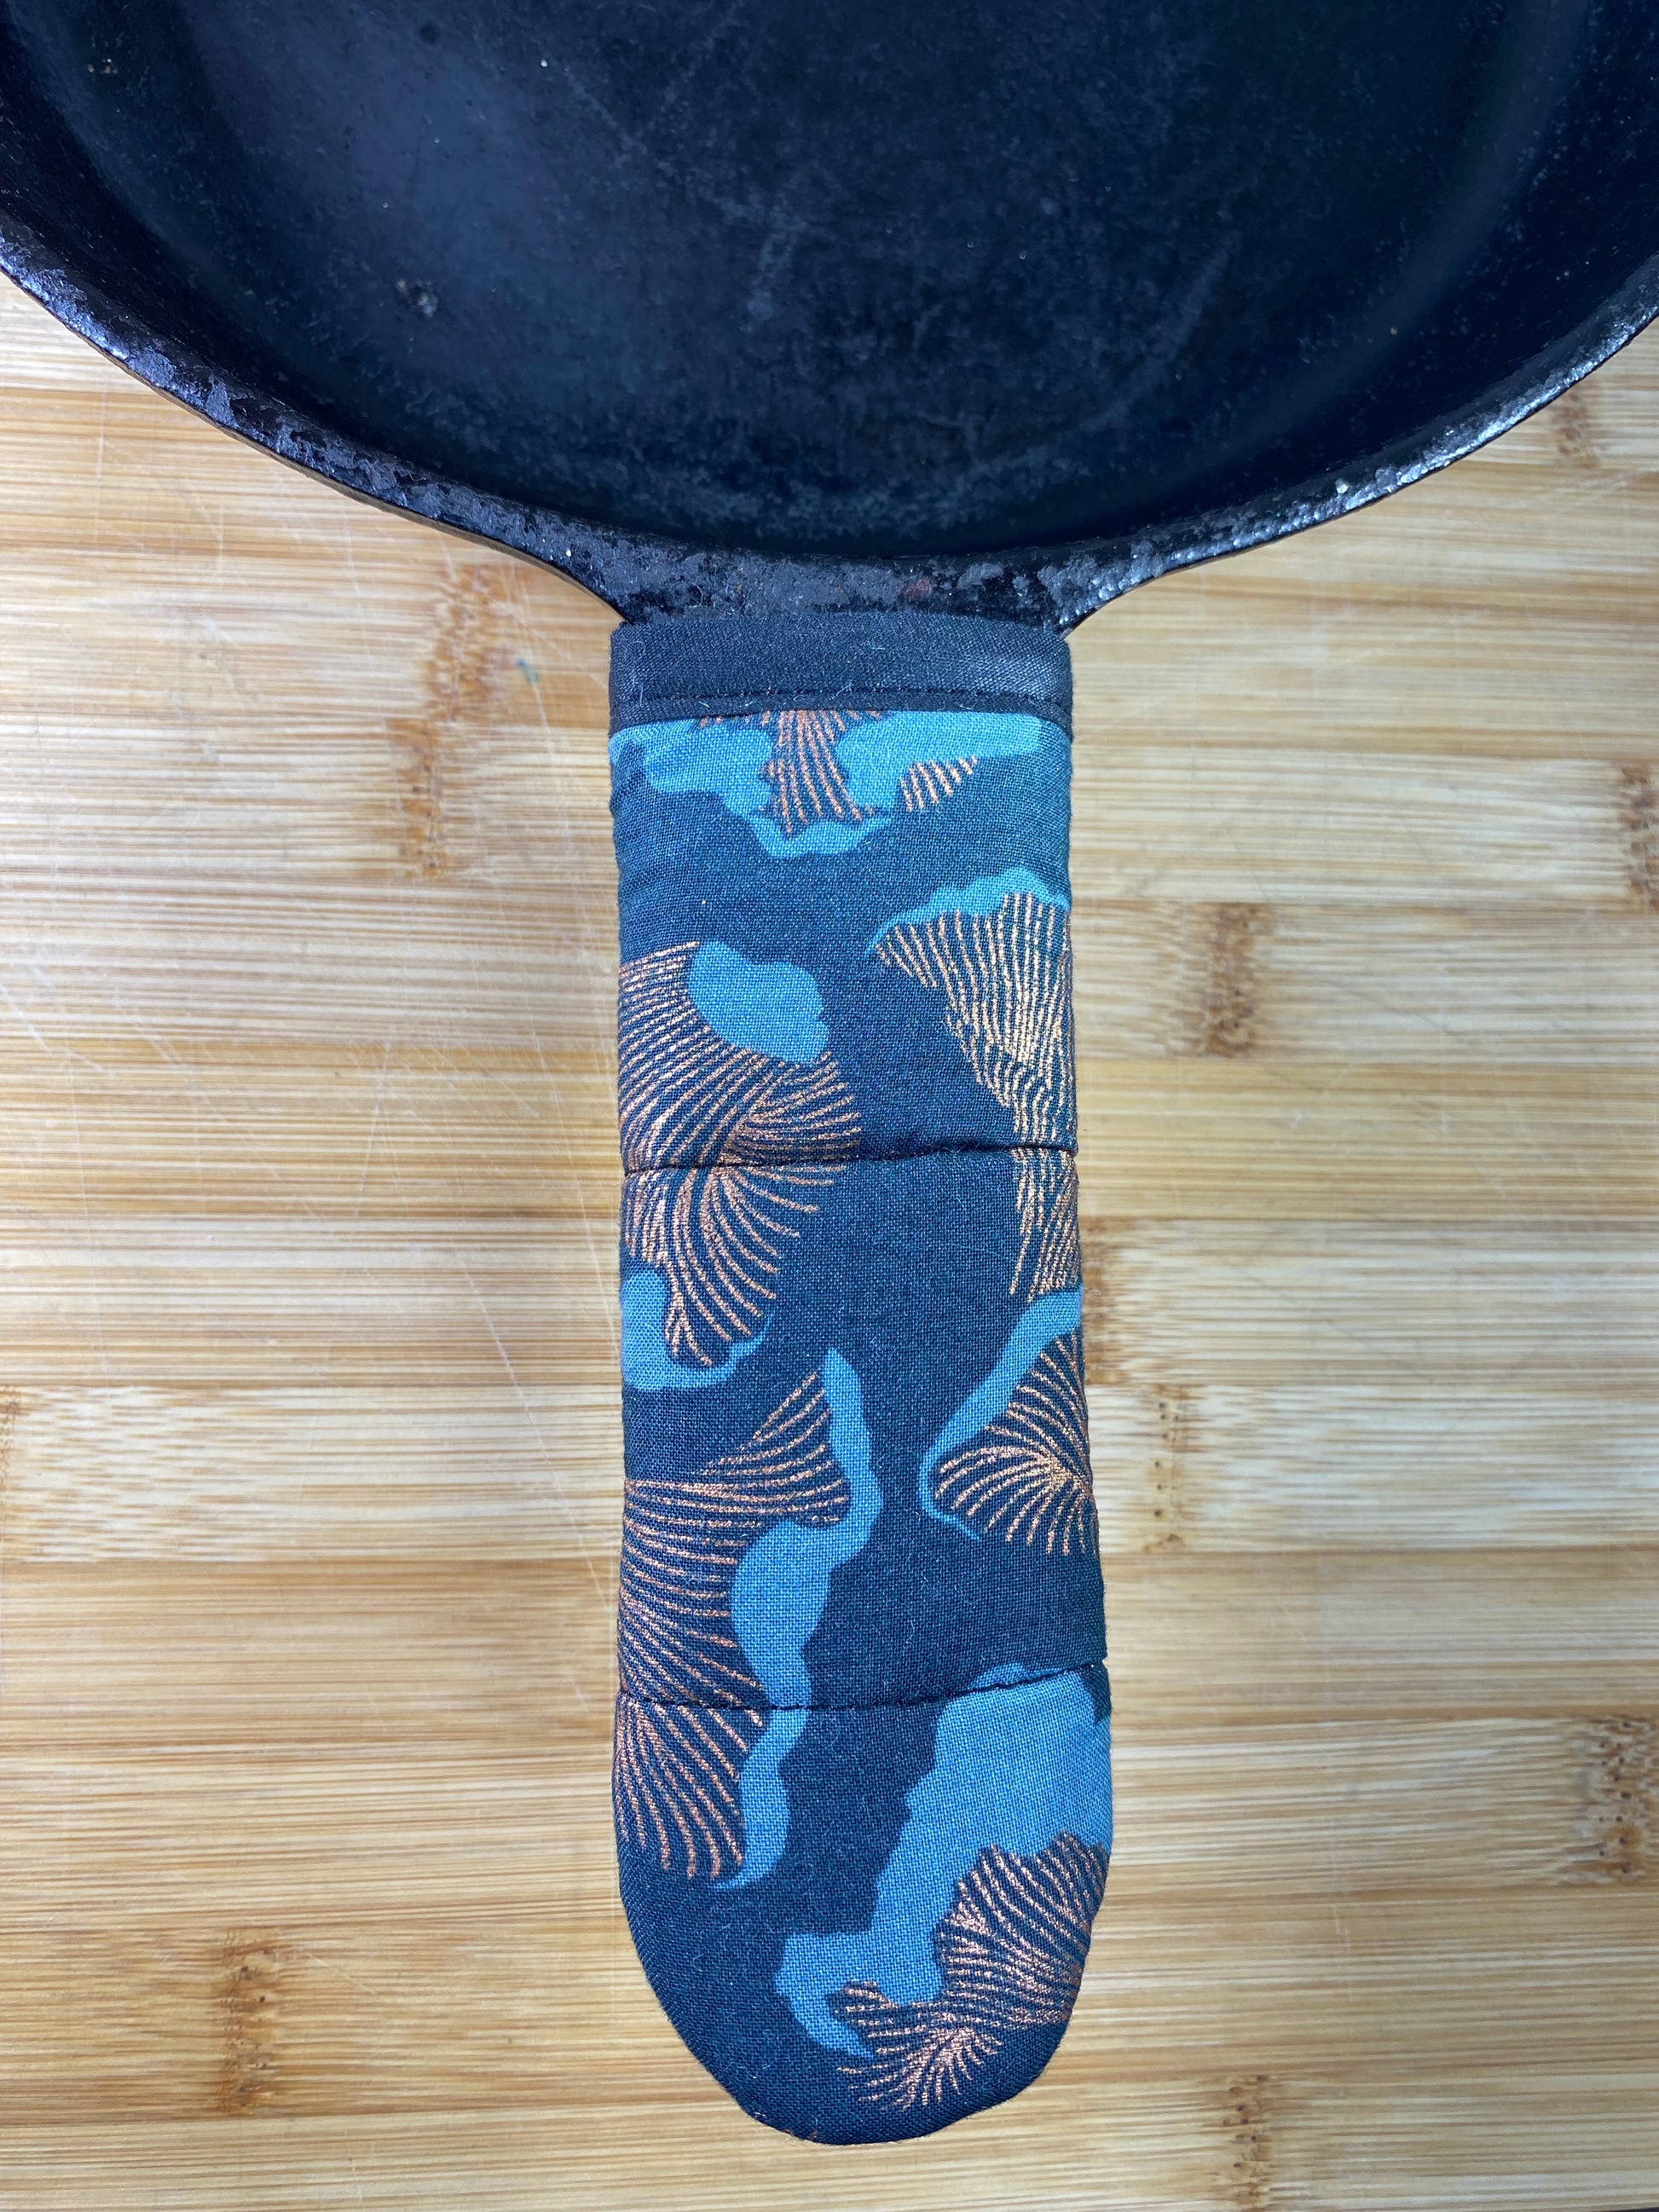 Cast Iron Skillet Handle Cover DIY - A Beautiful Mess